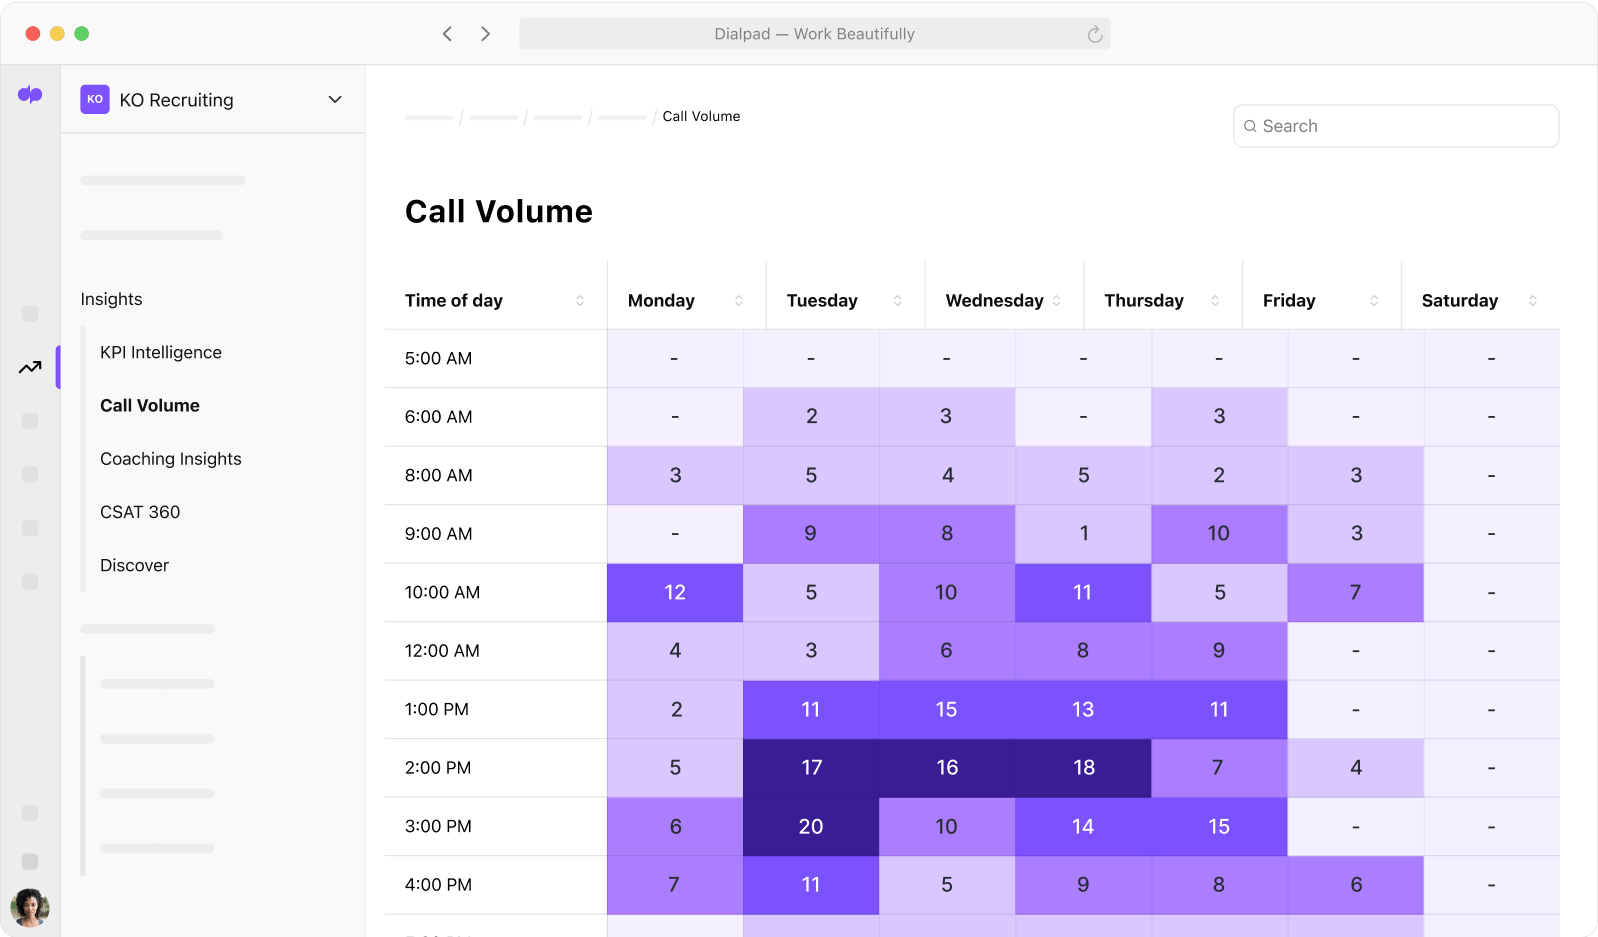 Screenshot of Dialpads built in heat map analytics feature showing call volumes knock out recruiting